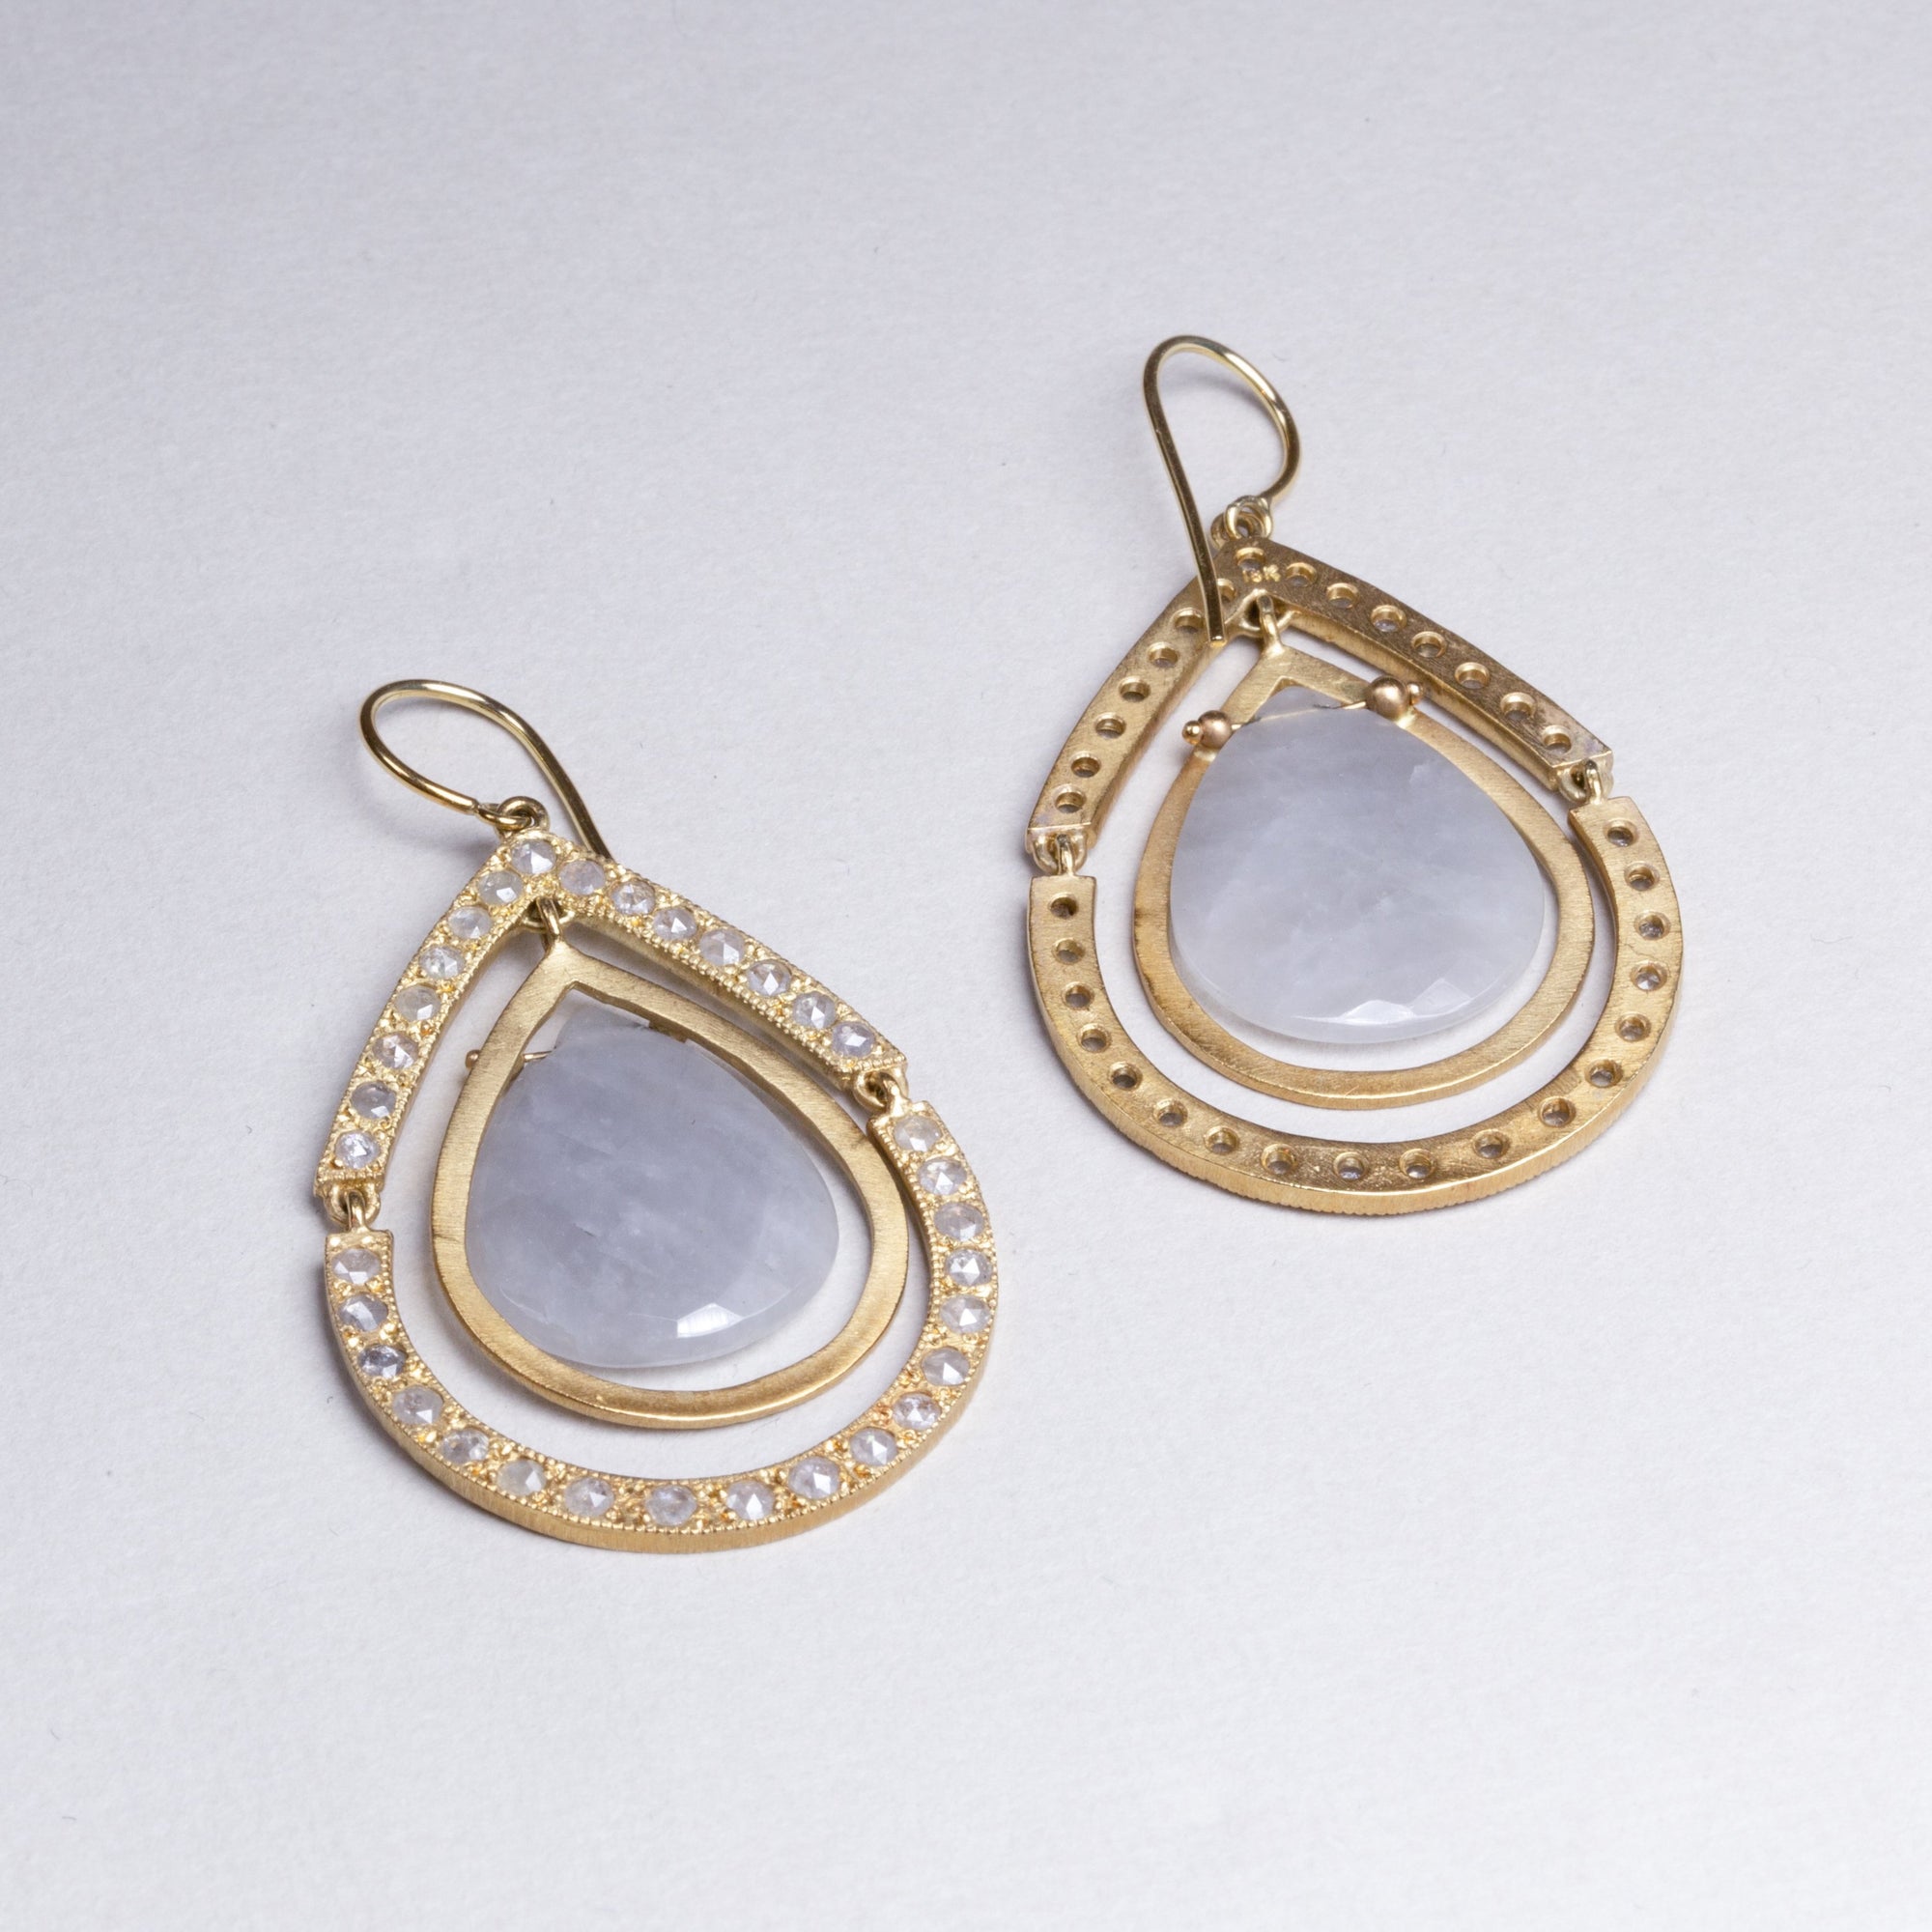 18ct Gold Drop Earrings with Diamonds and Grey Quartz